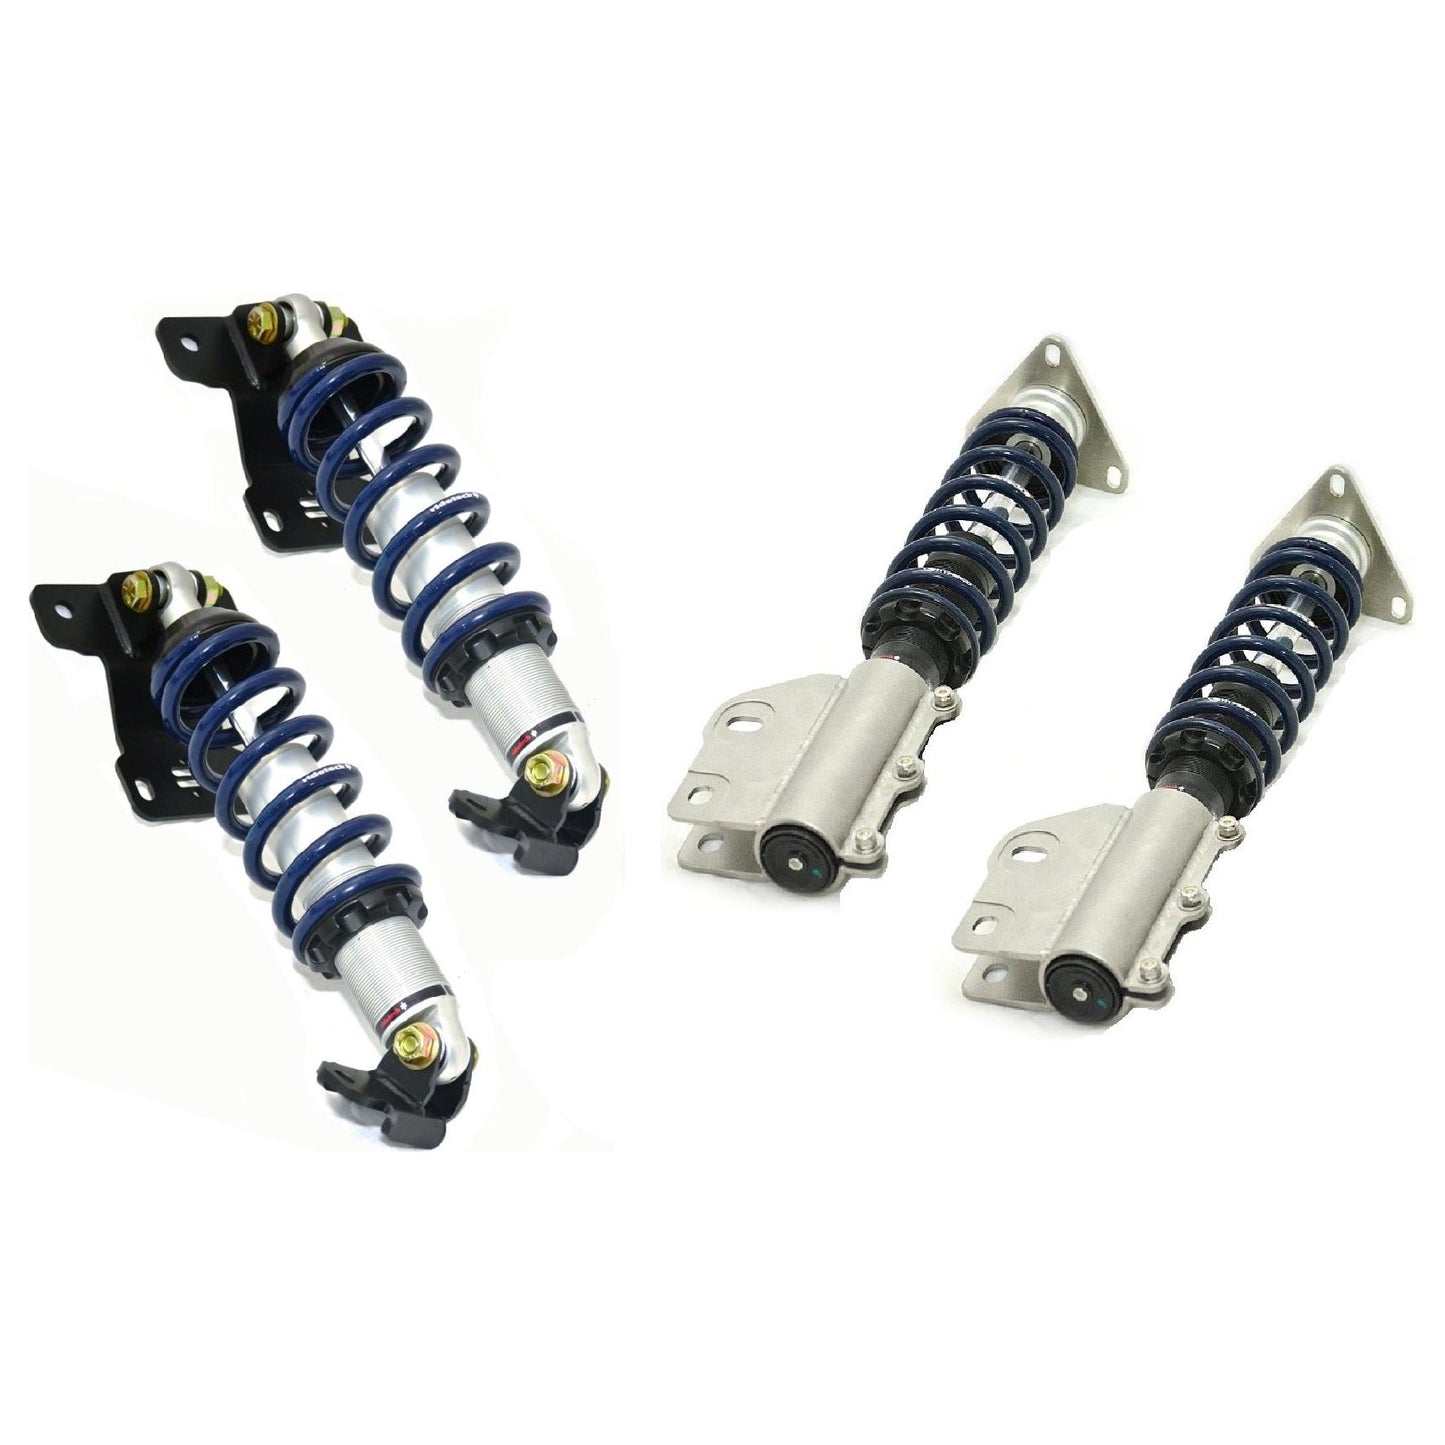 RideTech HQ Series Coilover System Fits 2015-20 Mustang